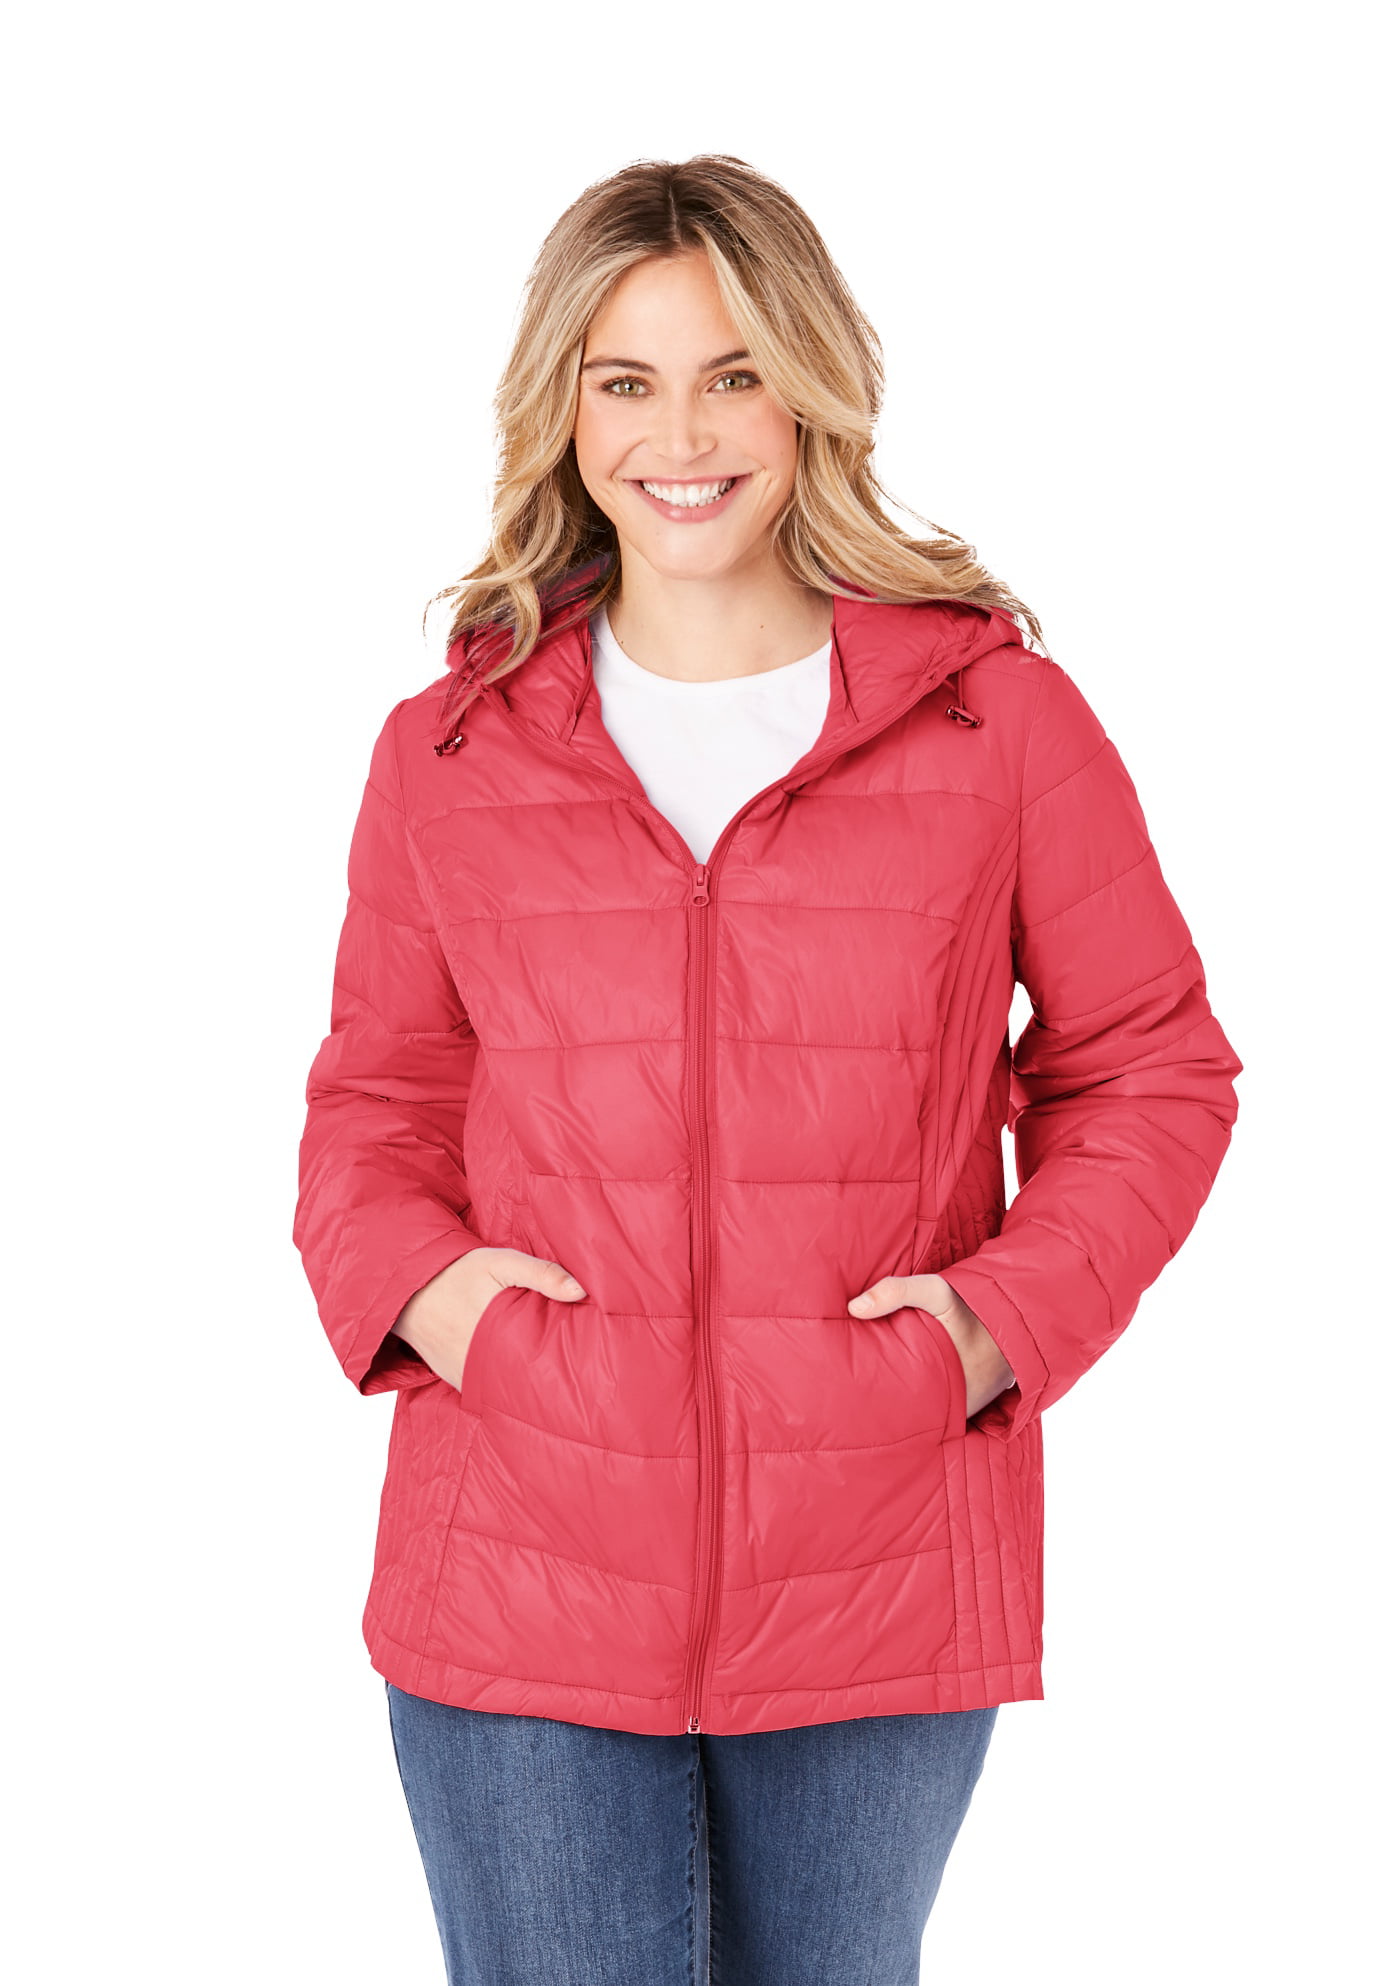 Woman Within - Woman Within Women's Plus Size Packable Puffer Jacket ...